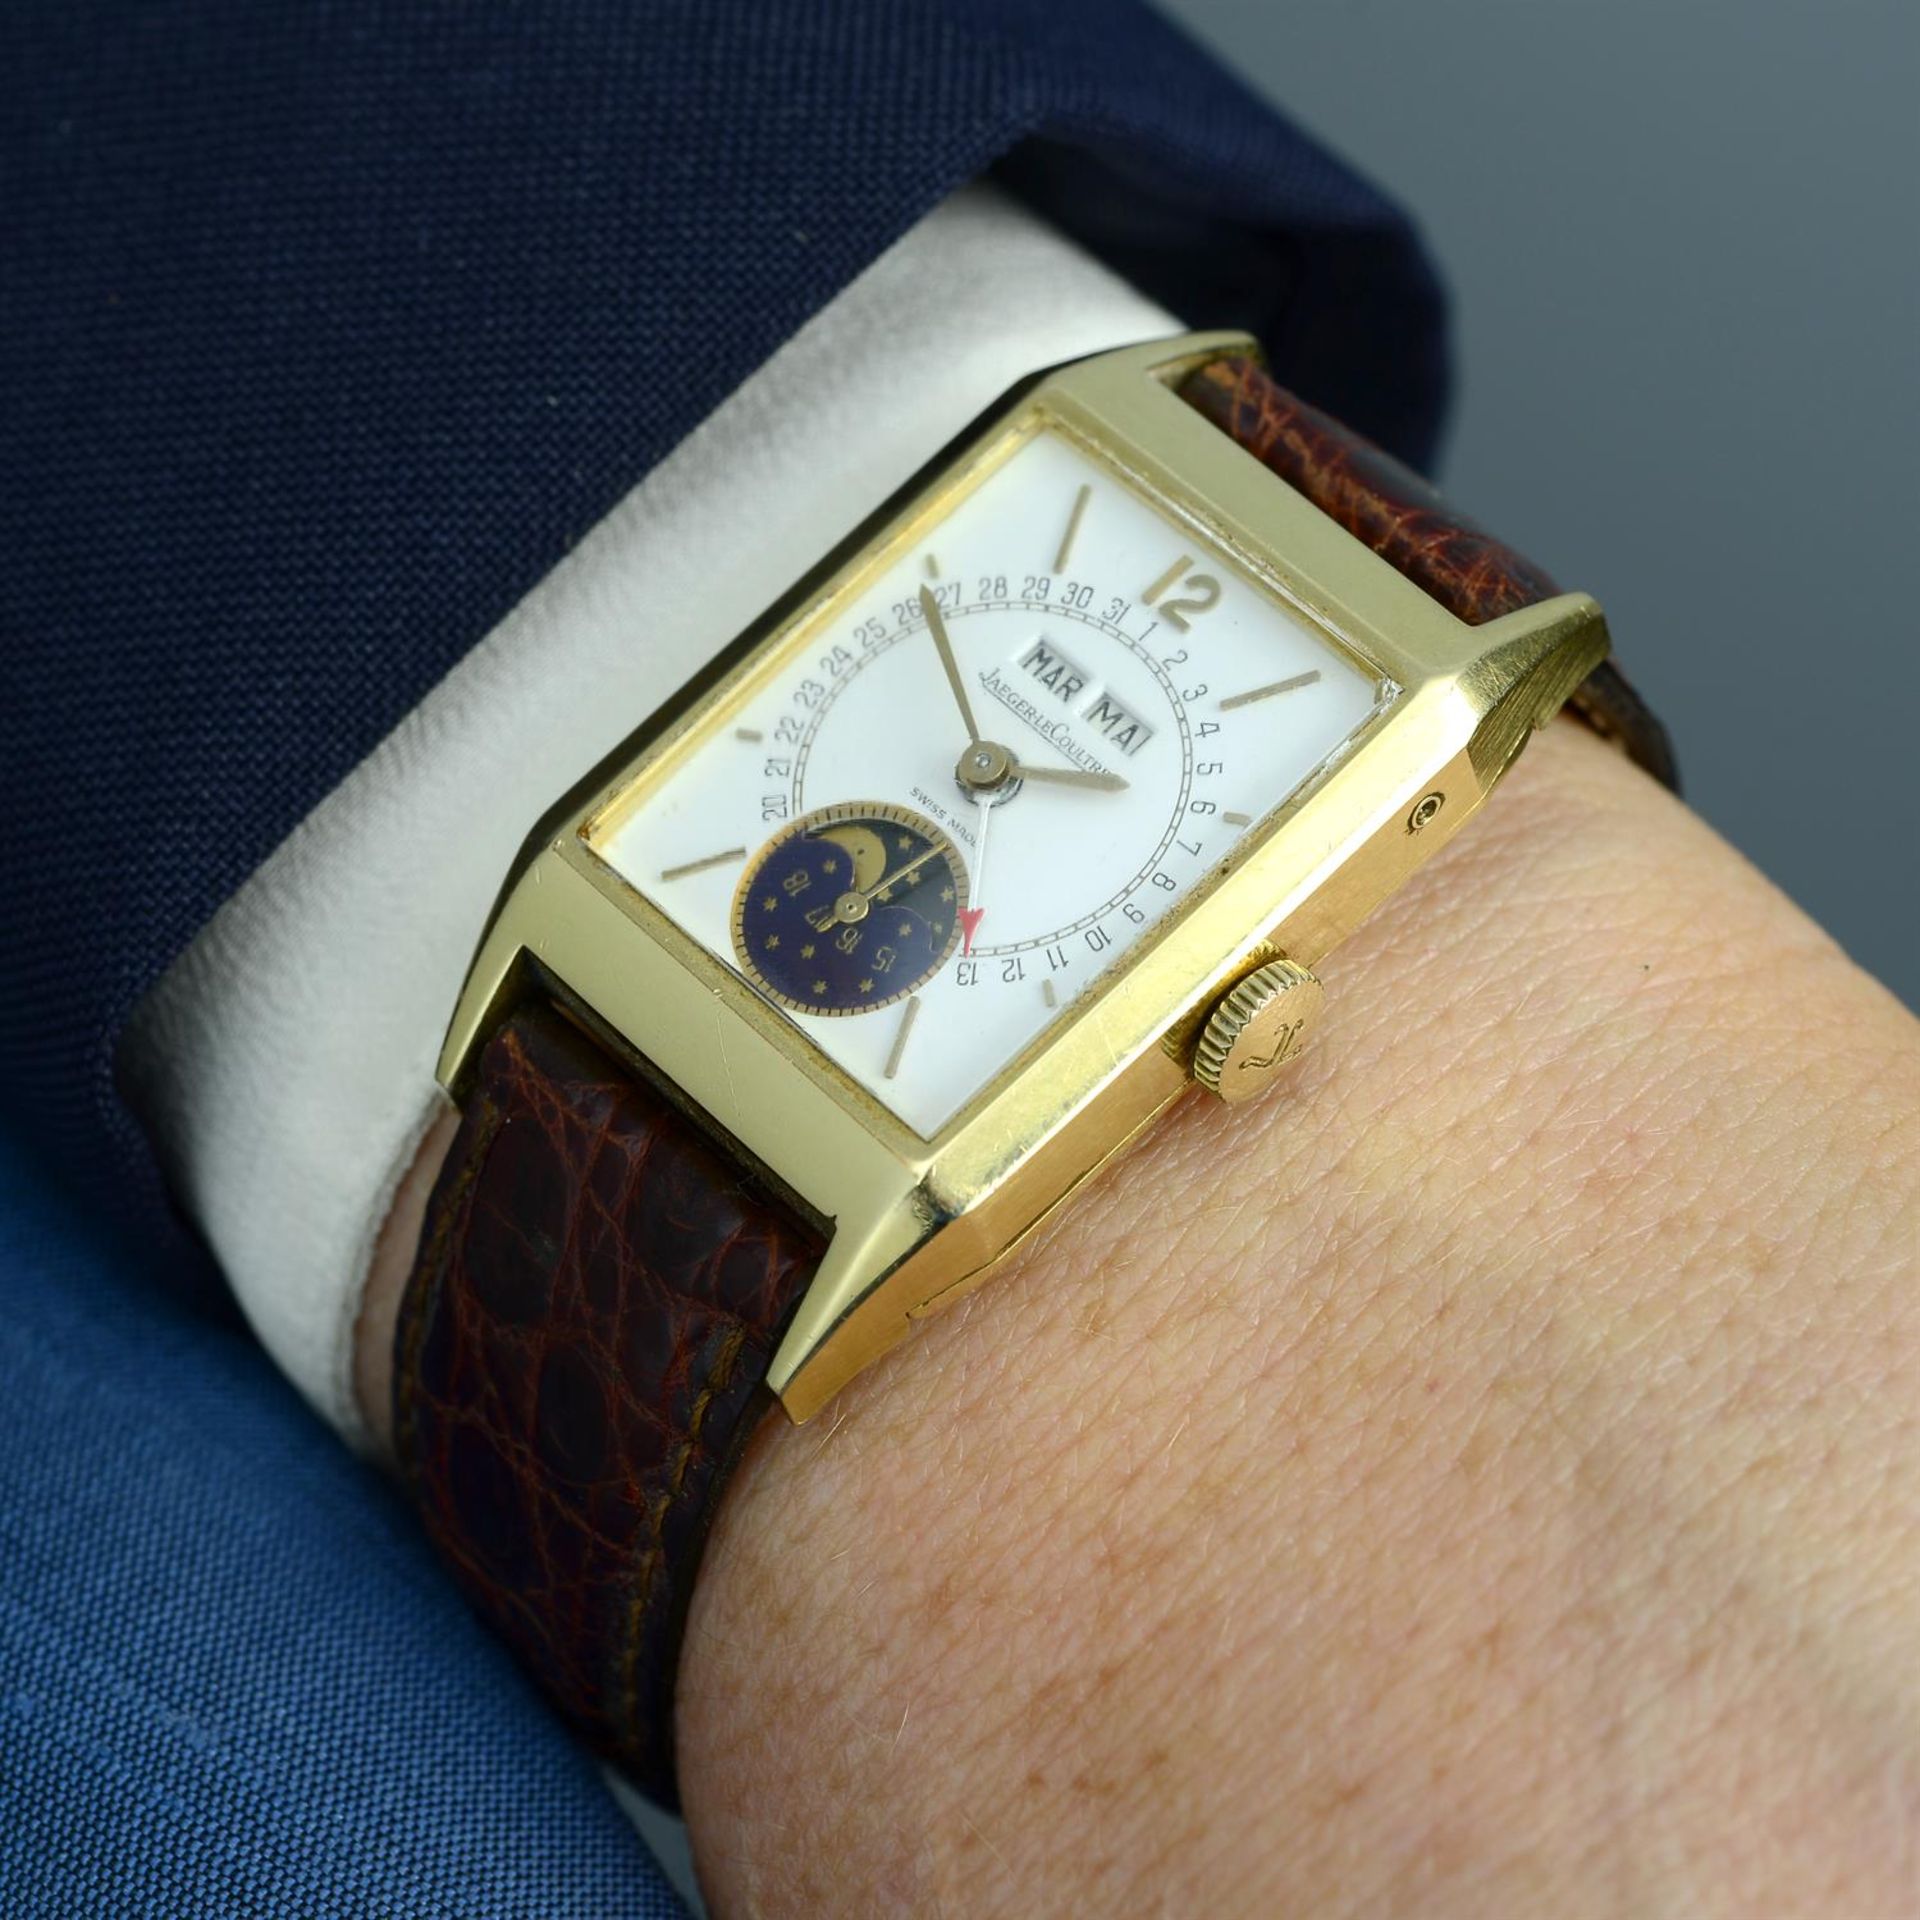 JAEGER-LECOULTRE - an 18ct yellow gold Serie Unique triple-calendar moonphase wrist watch, 24mm. - Image 6 of 7